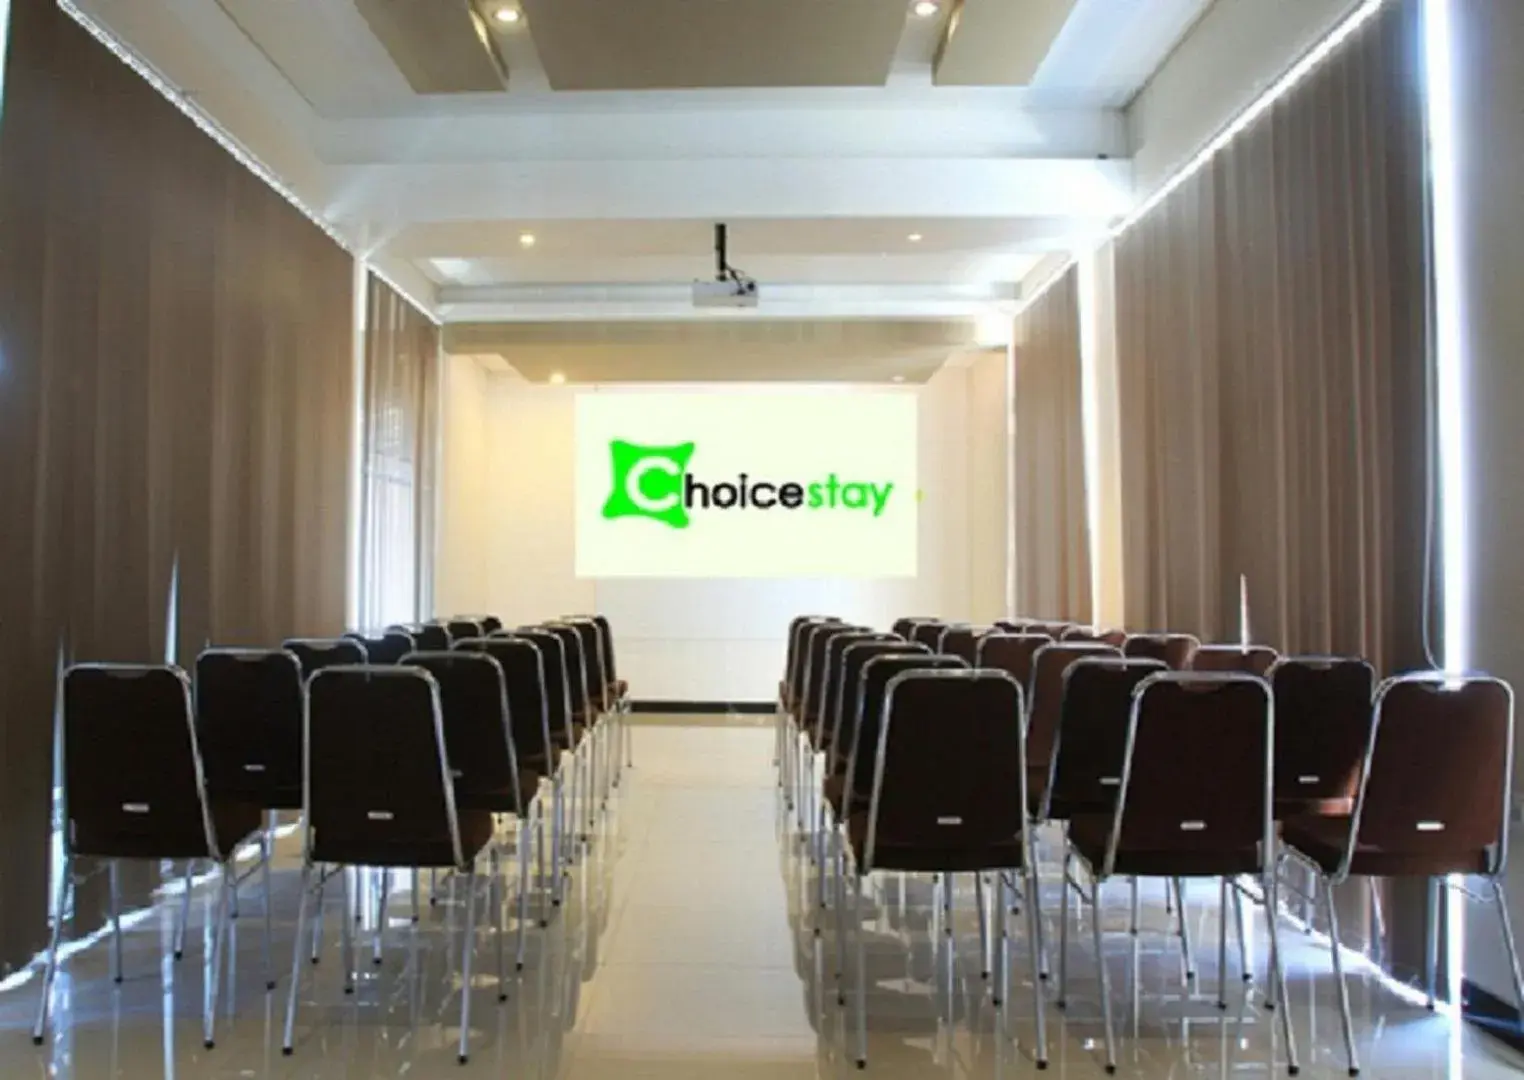 Meeting/conference room in Choice Stay Hotel Denpasar